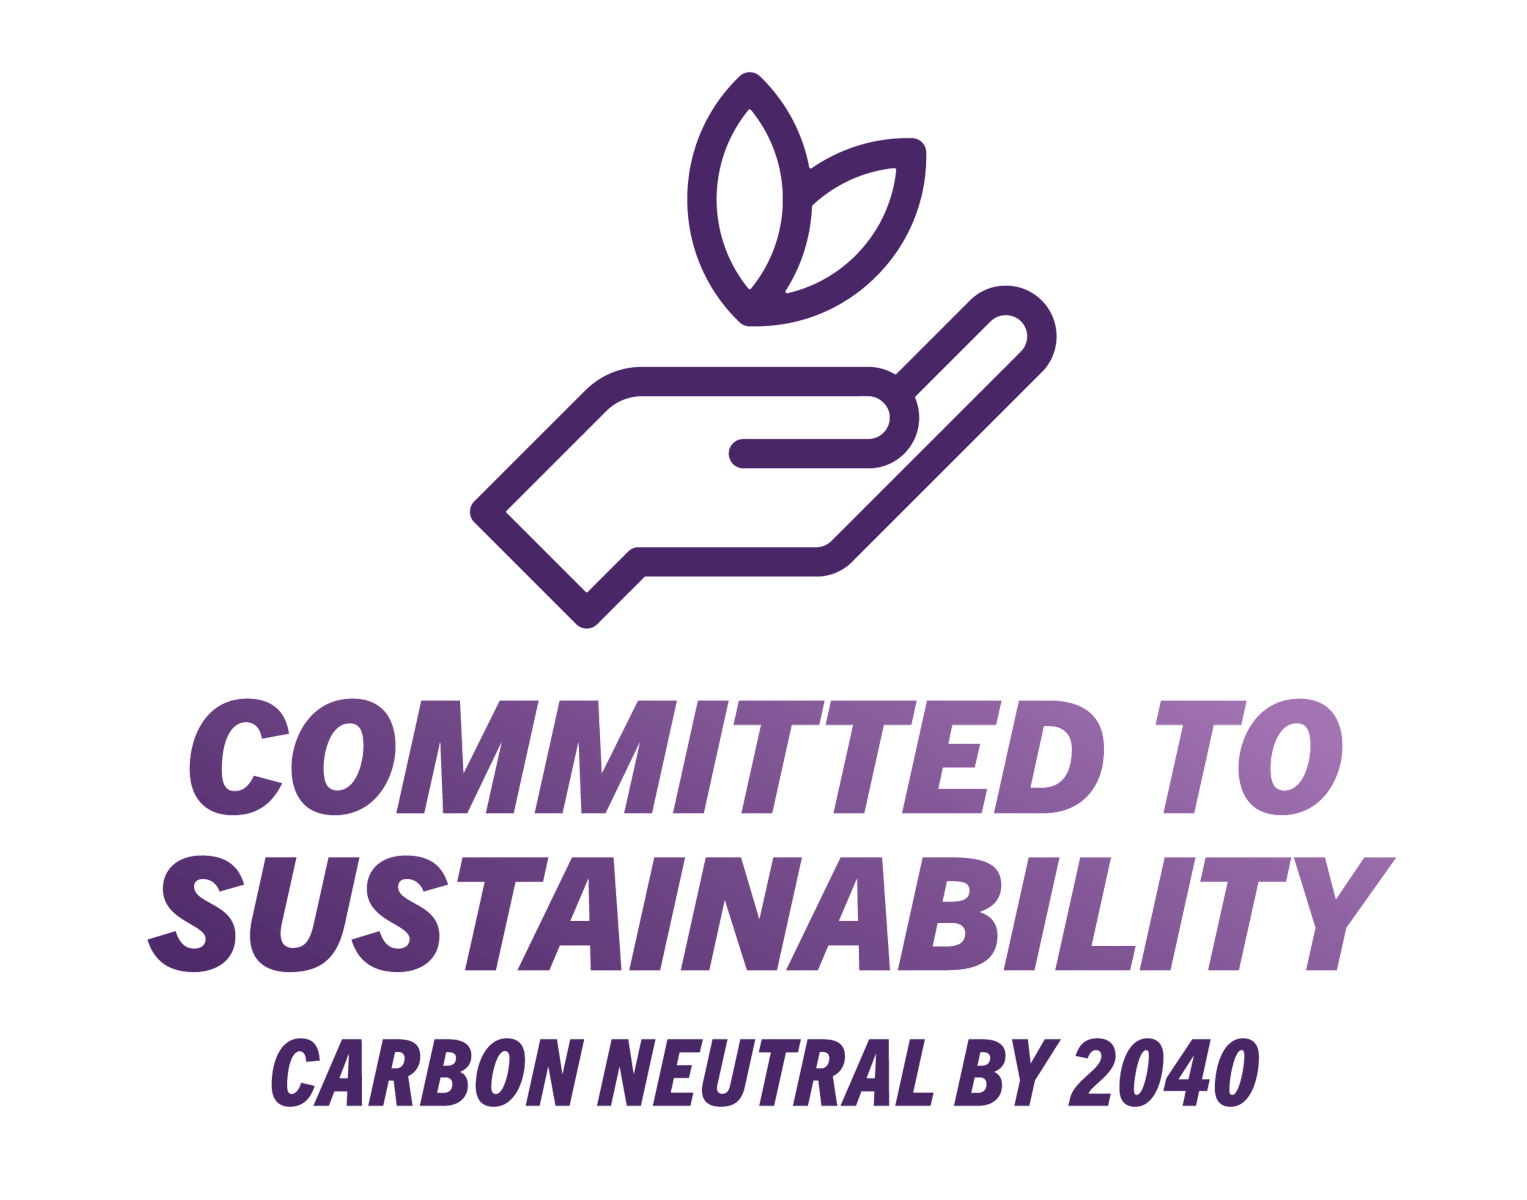 Weber State is on track to become carbon neutral by 2040.